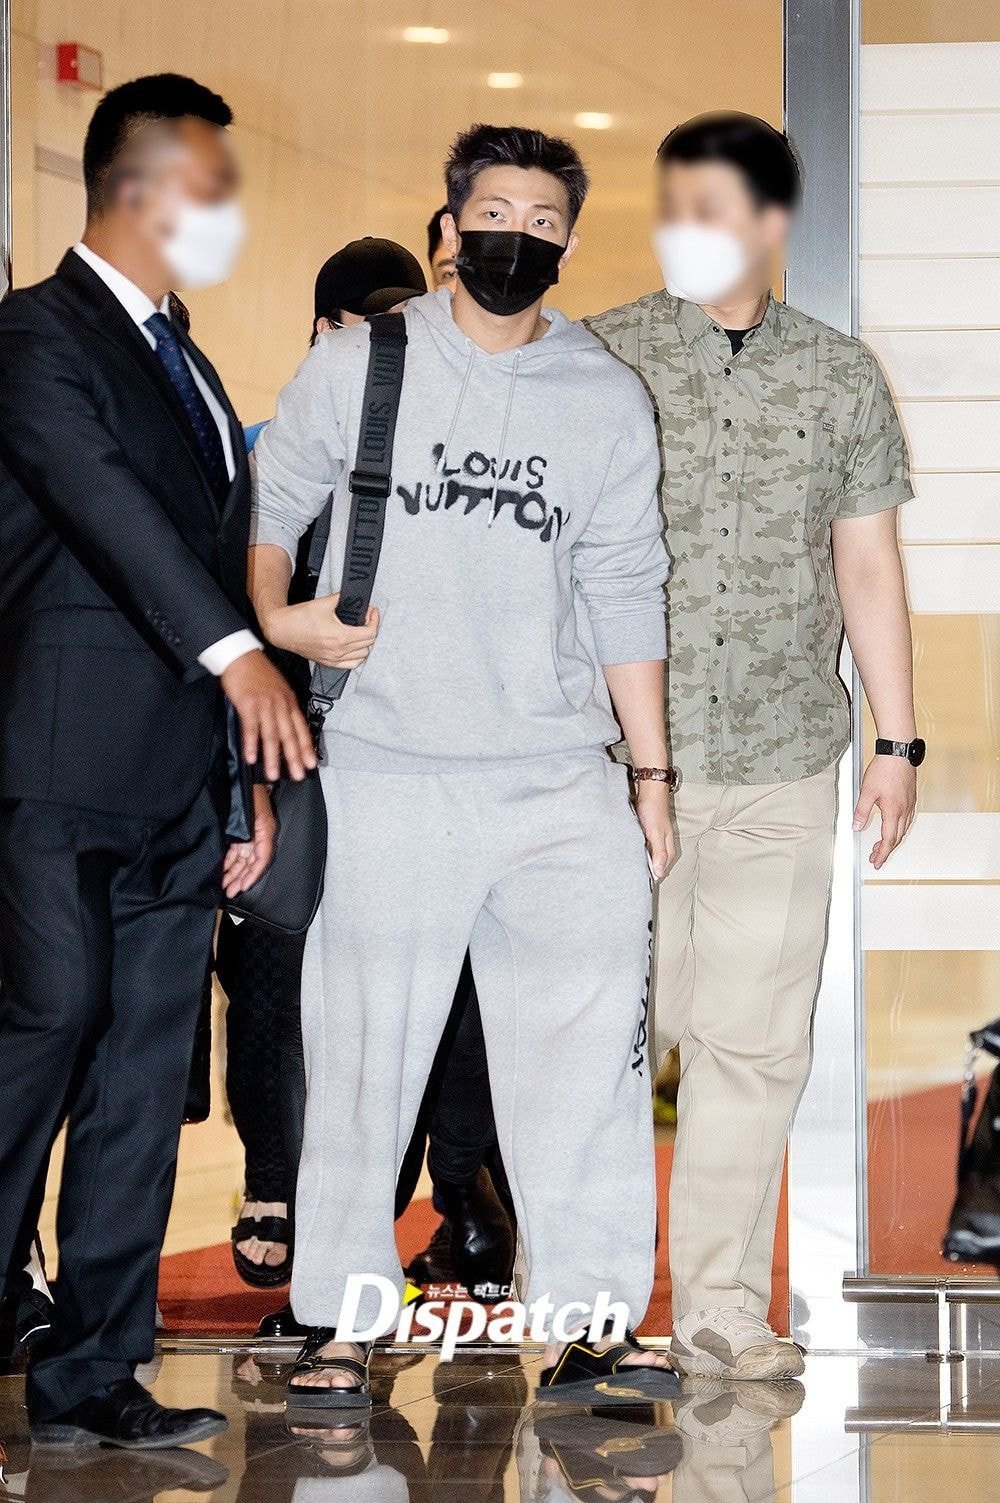 BTS's first airport pictures on the way to attend the 'SDG Moment 2021' session of the 76th United Nations General Assembly on September 20th